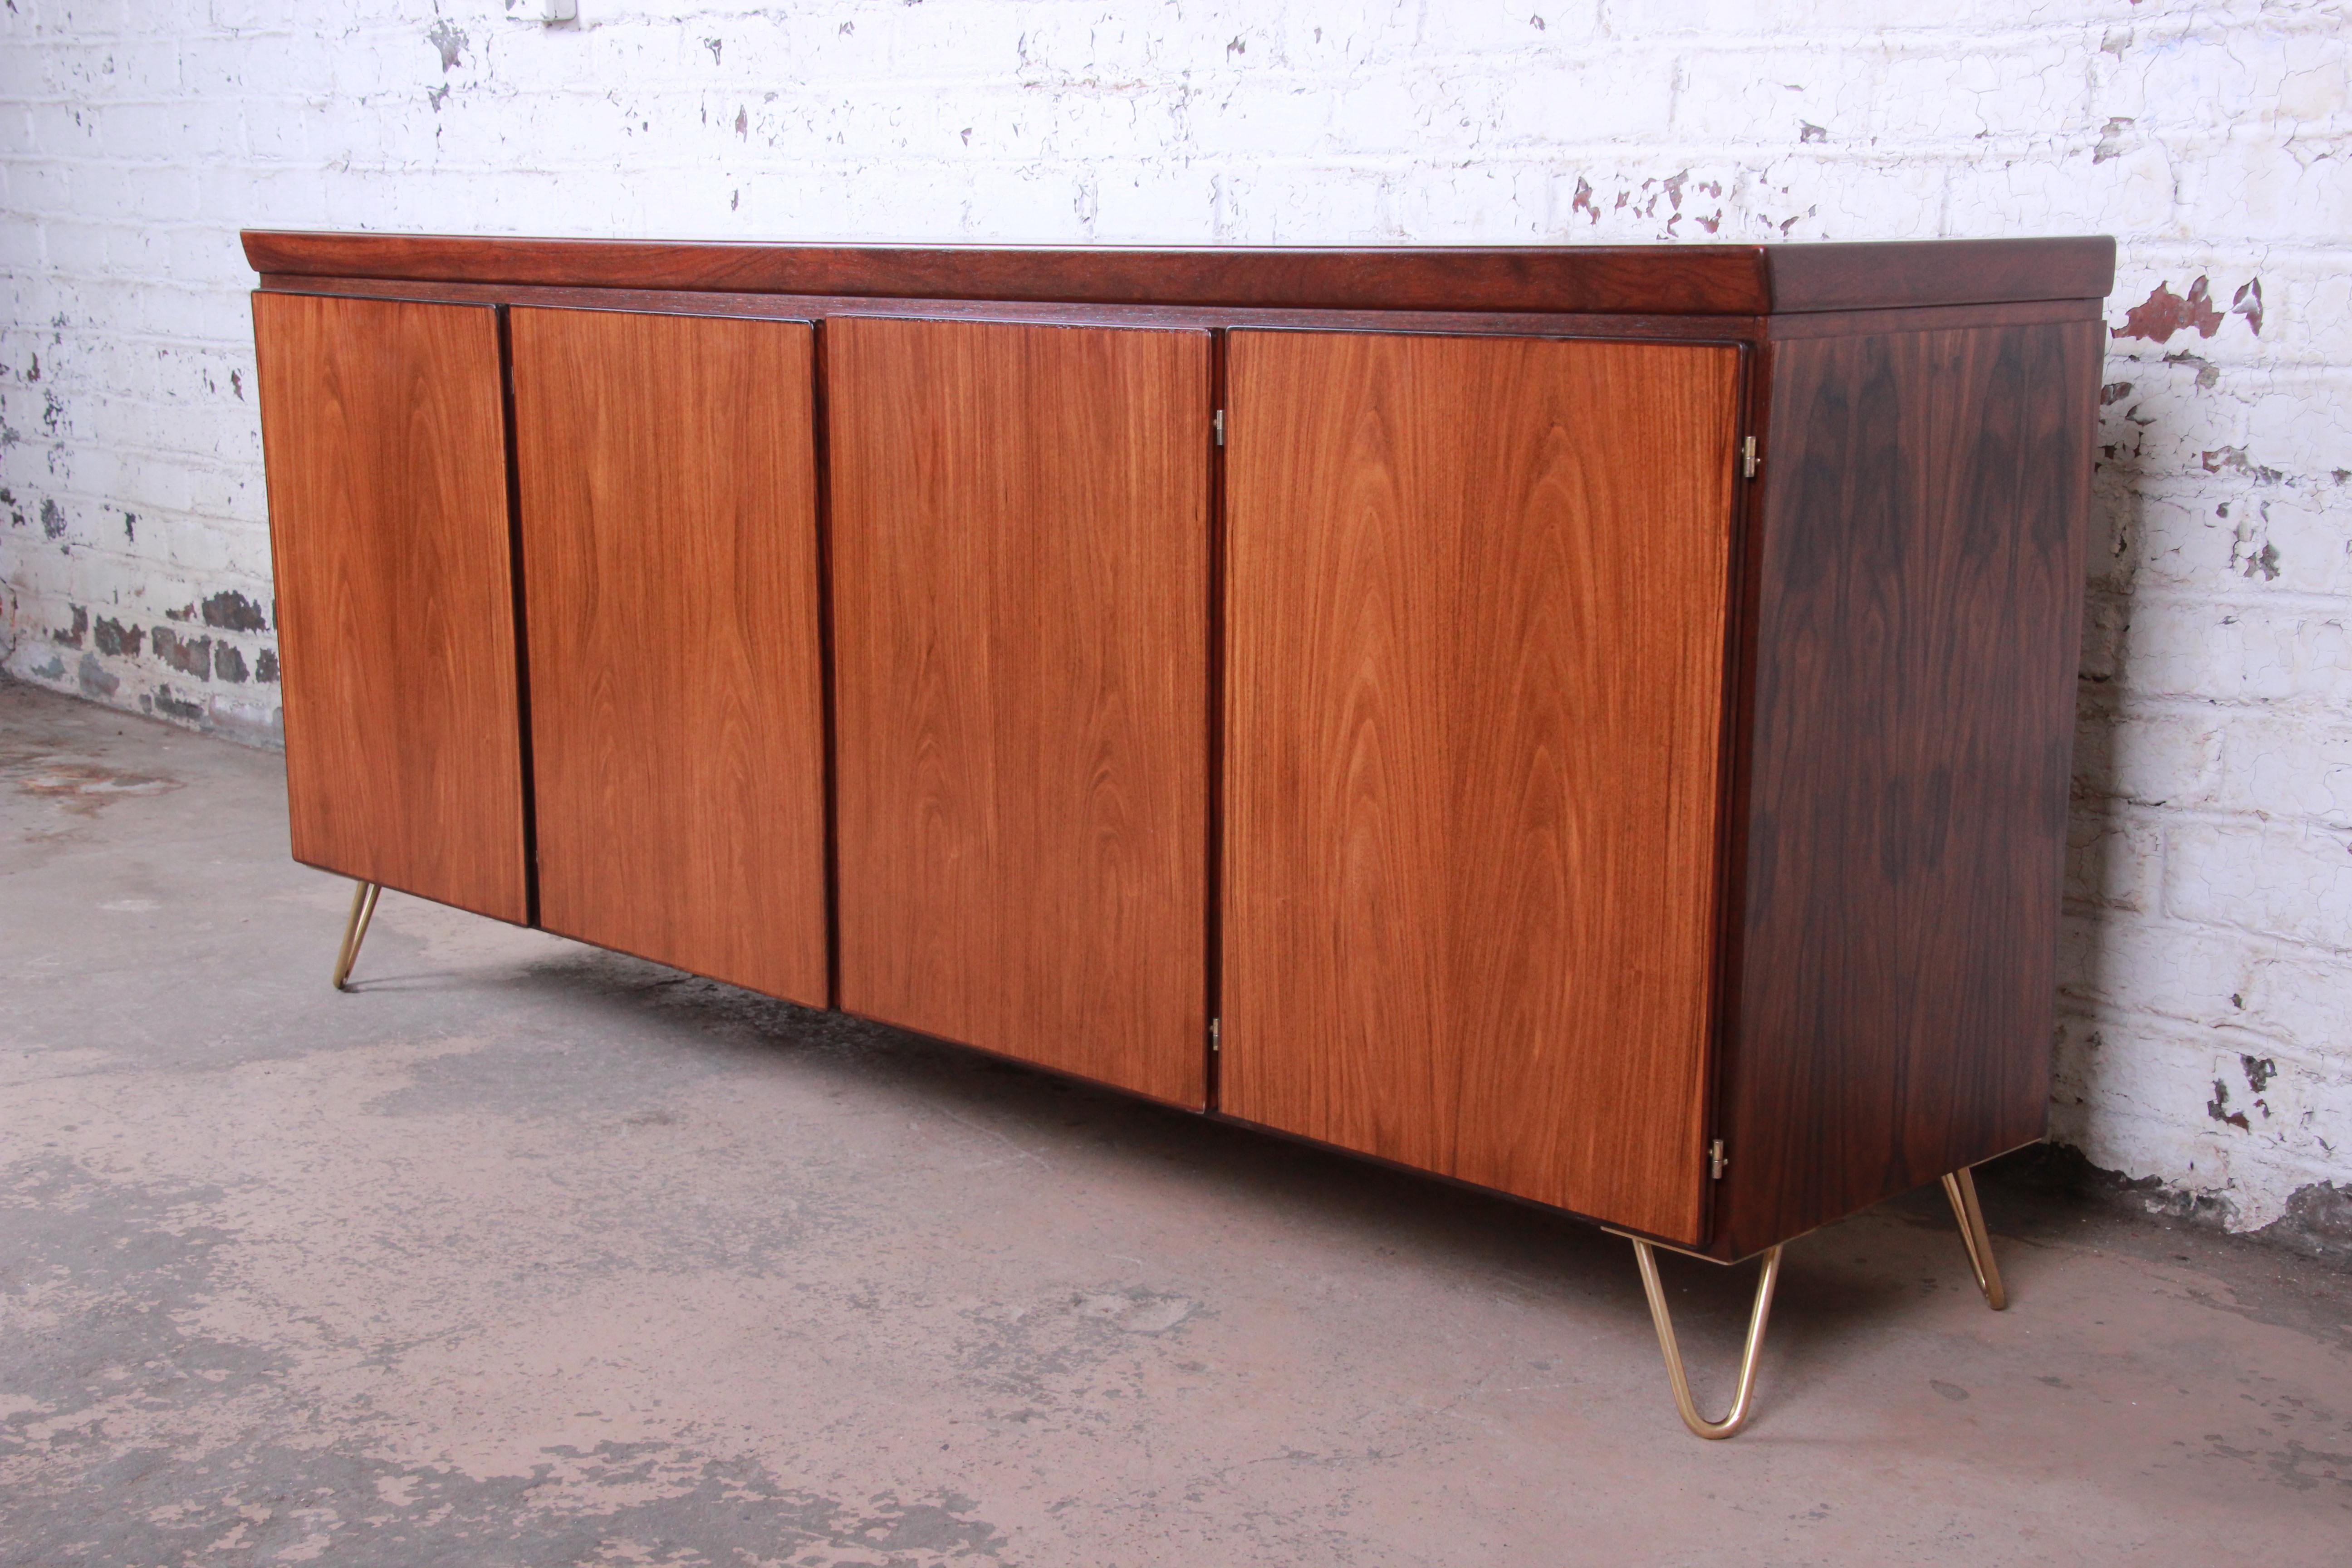 Offering an exceptional midcentury Danish modern rosewood sideboard or credenza by Skovby Møbelfabrik. The credenza features stunning rosewood grain and sleek, Minimalist Danish design. It offers ample room for storage, with five felt-lined